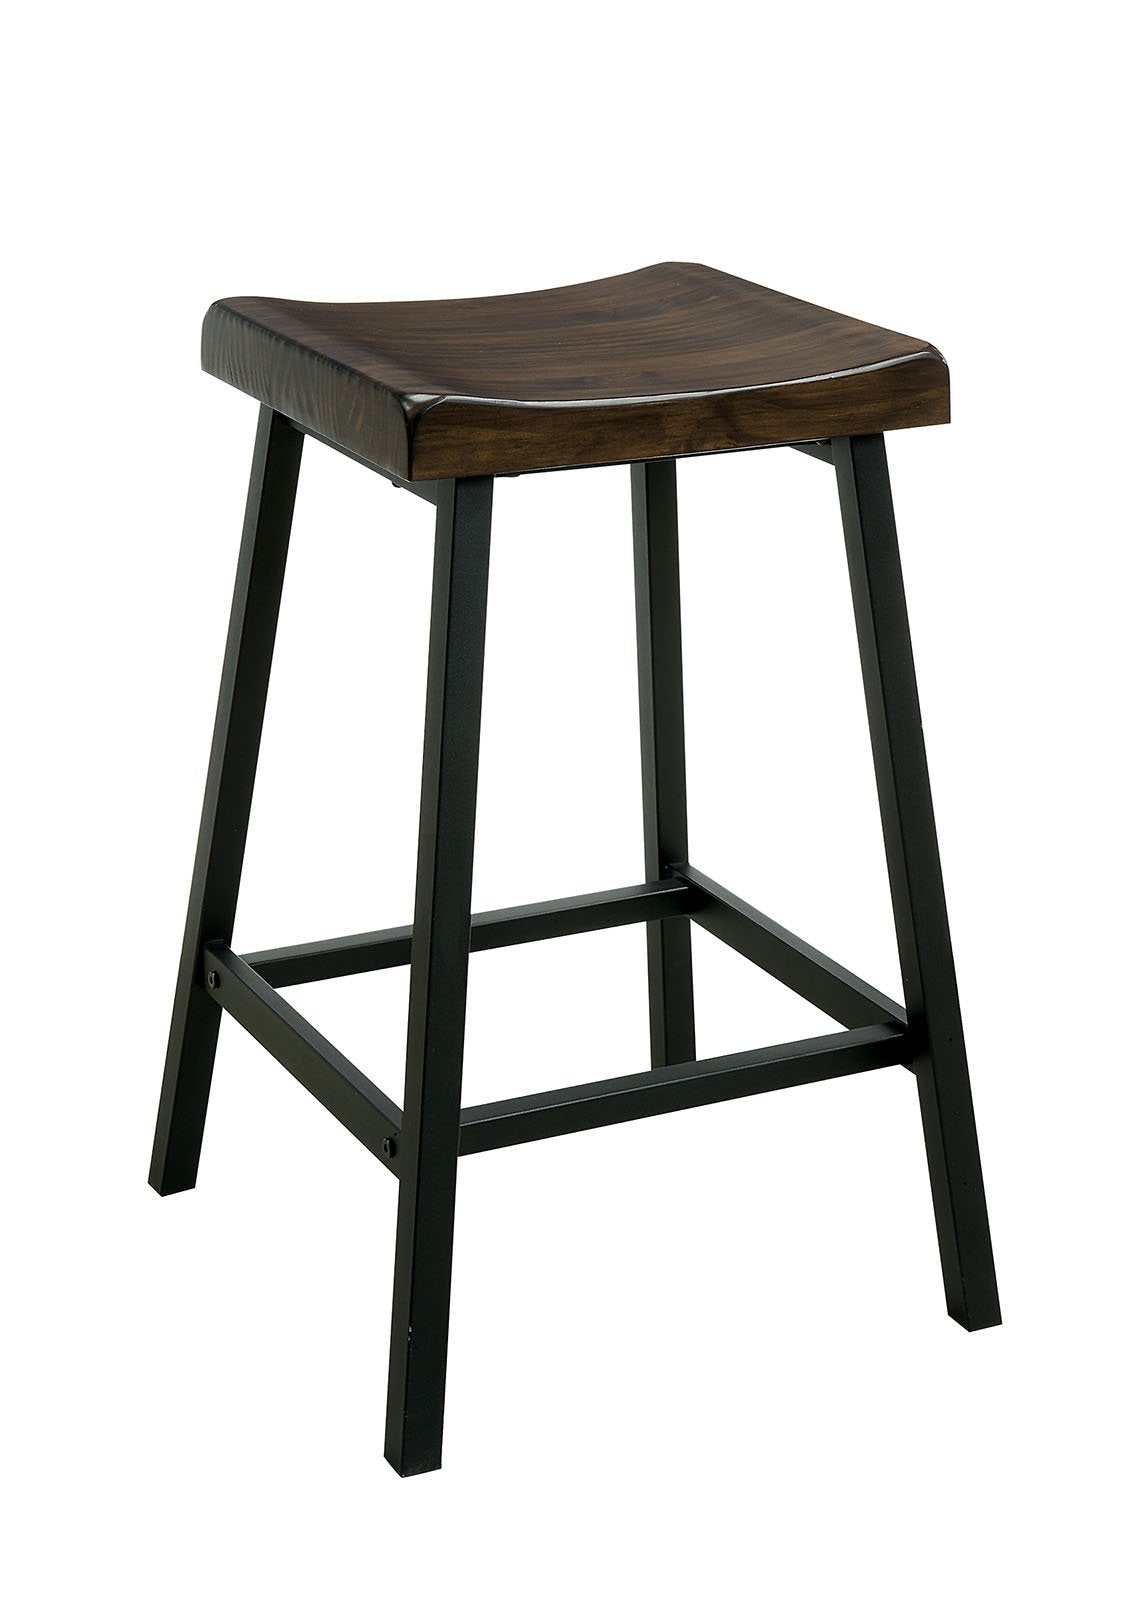 Wooden Counter Height Stool with Metal Legs, Pack Of Two, Black and Brown - BM183599